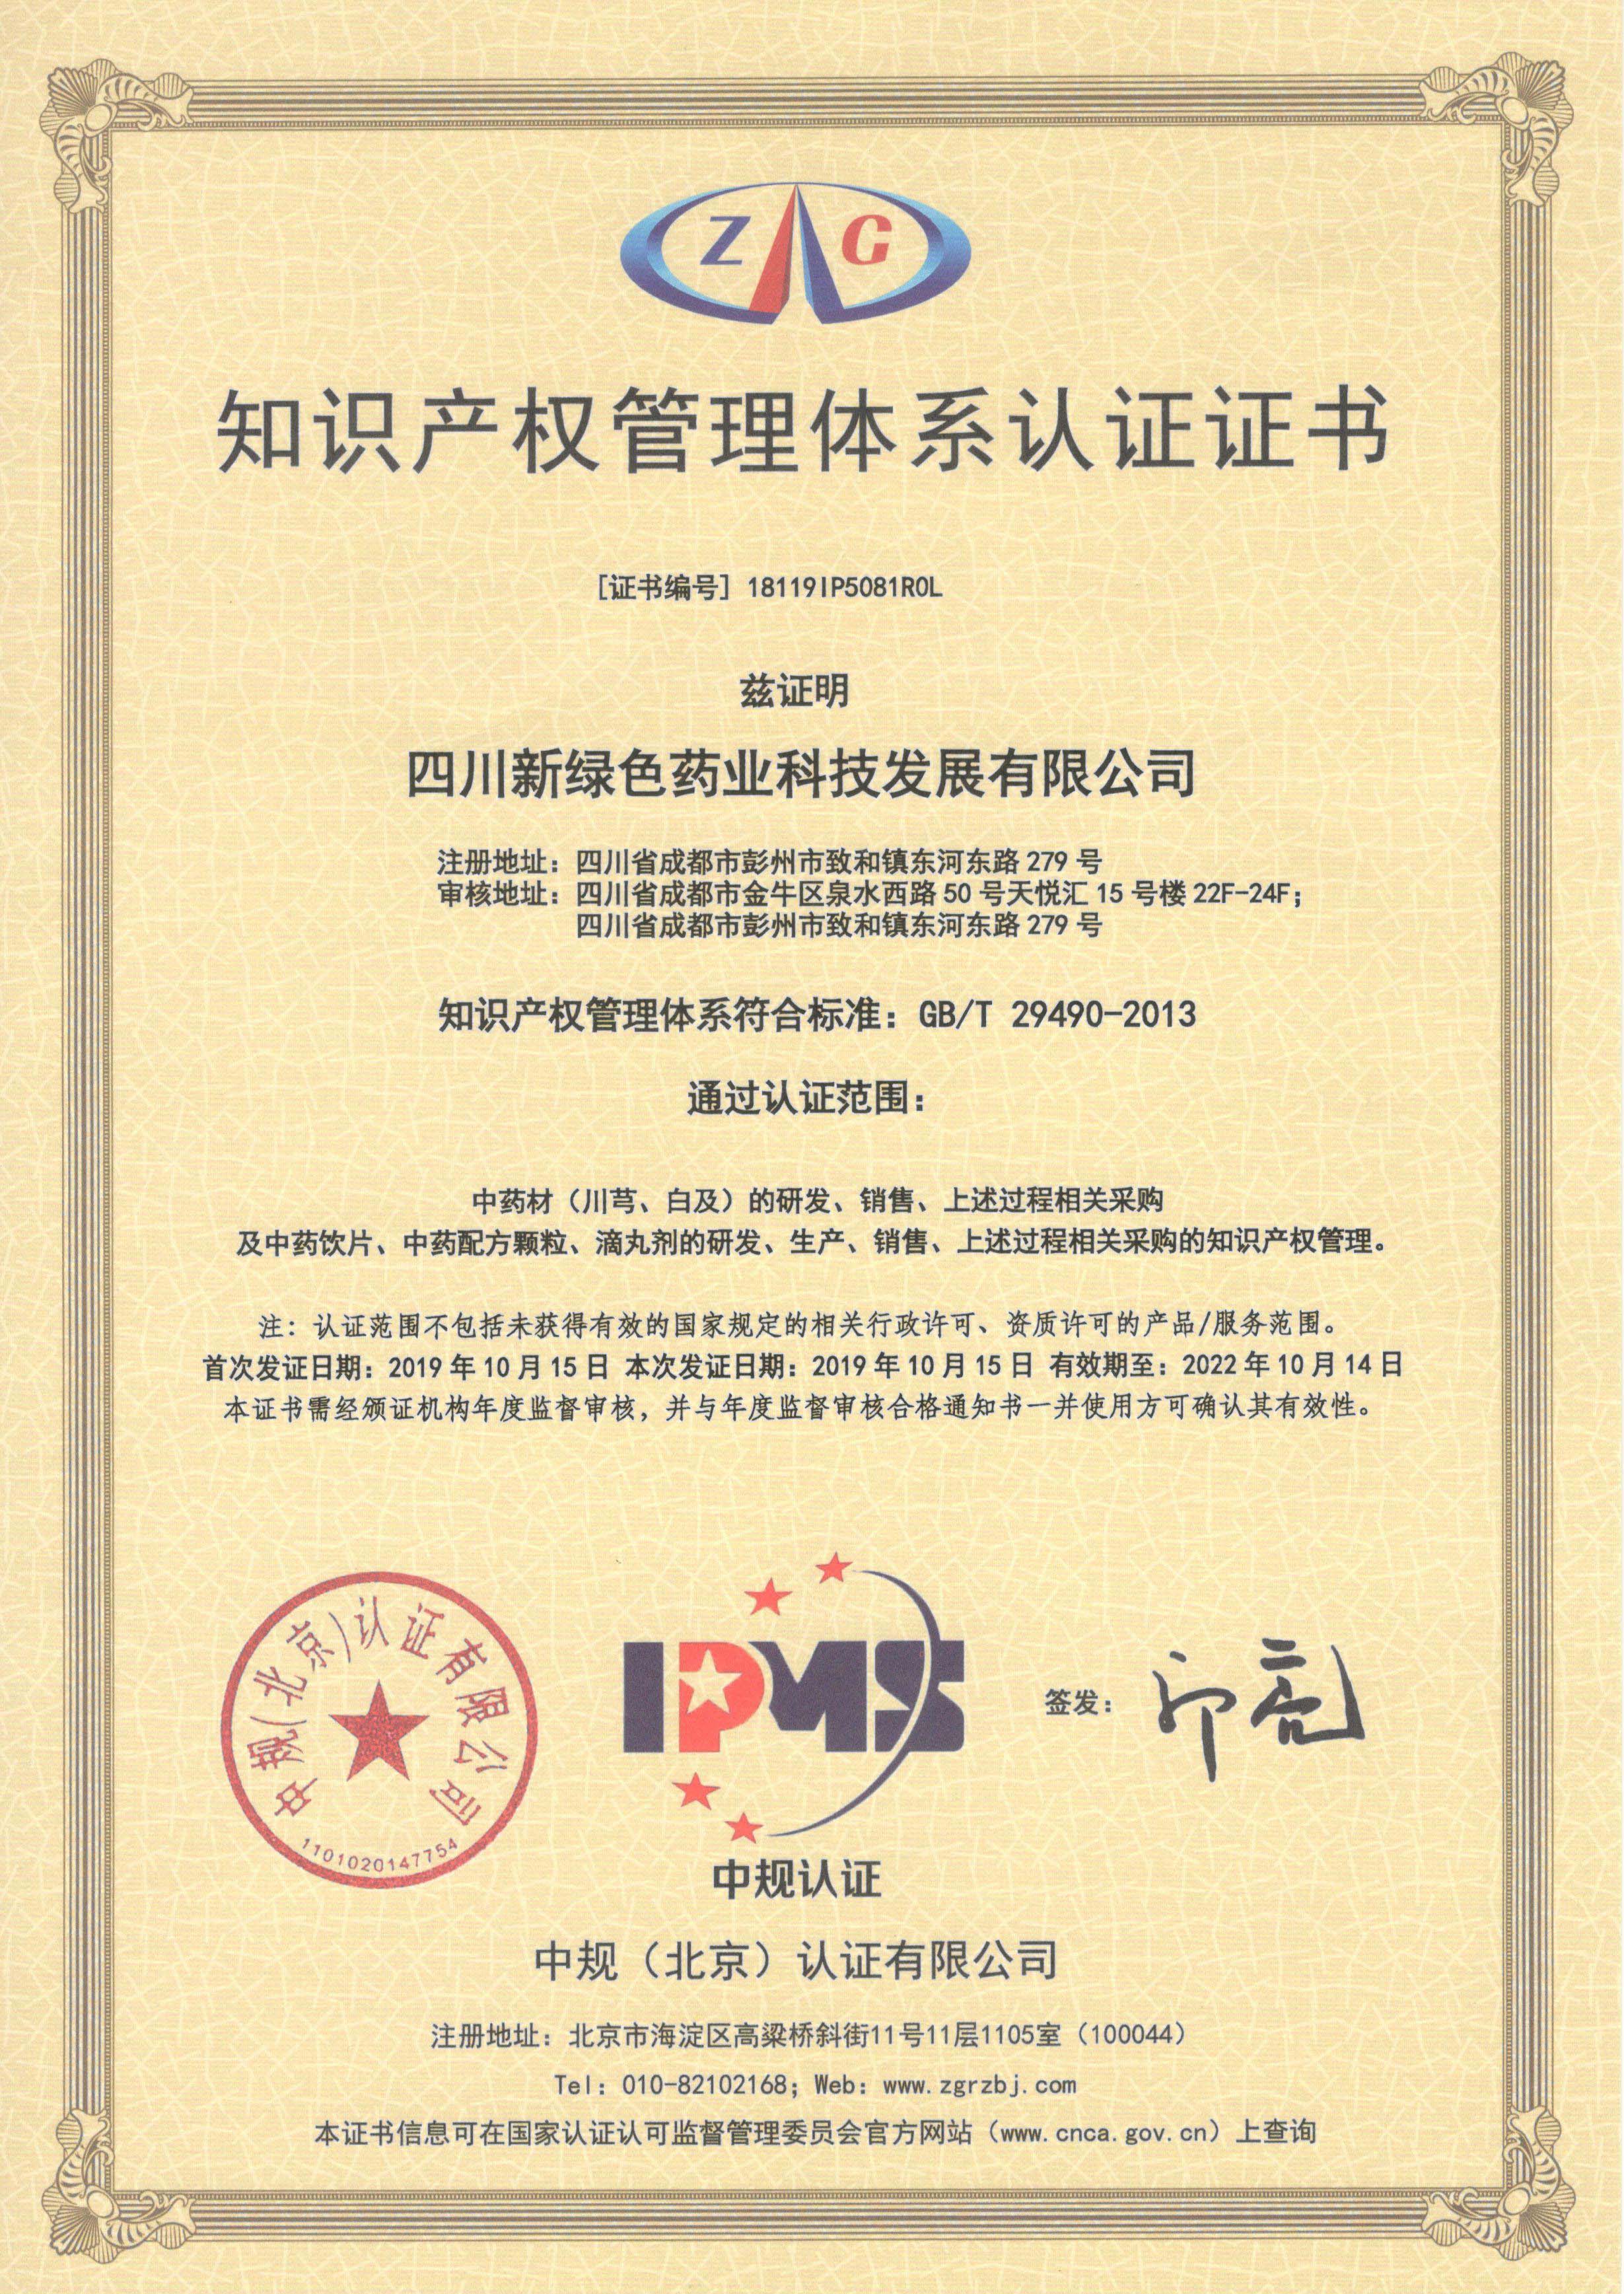 Copy of certification certificate of intellectual property management system